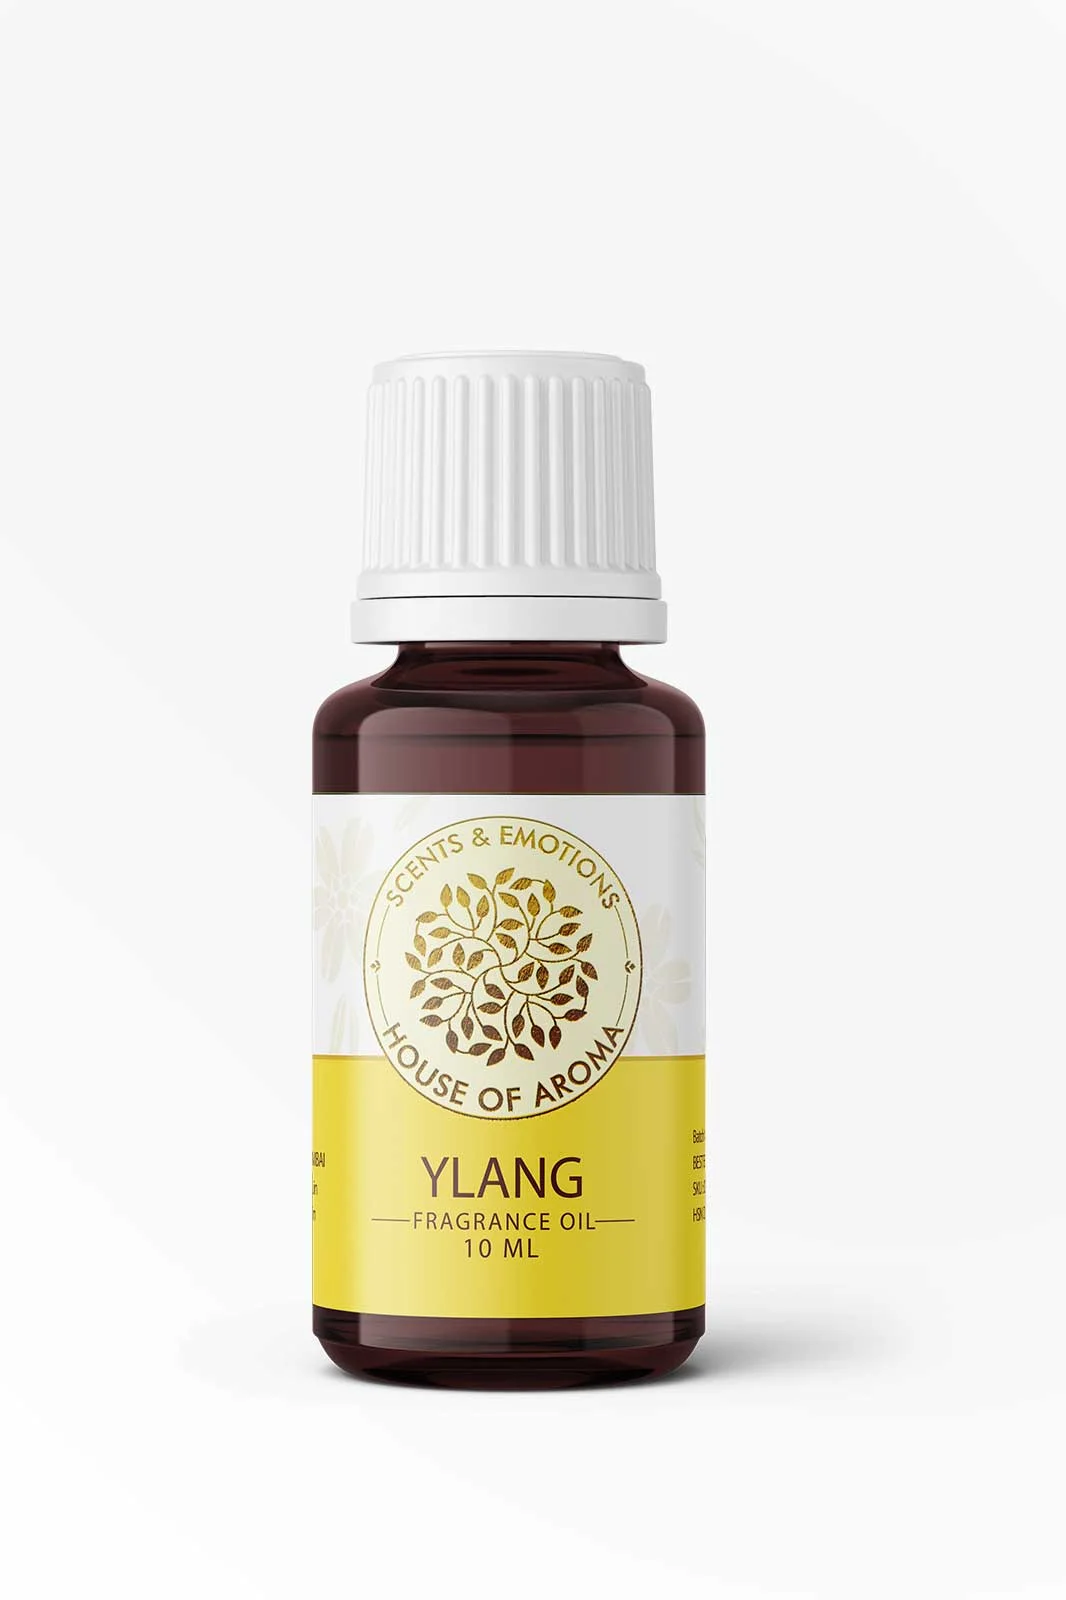 Fragrance Oil, Aroma oil, Synthetic oils, Fragrance oil for candles, oil for diffusers, Aromatic oil, Candle oil, Aromatherapy oil, oil manufacturers, House of Aroma, ylang fragrance oil, ylang good scents, ylang ylang fragrance oil for candles, ylang ylang fragrance oil benefits, ylang ylang flower oil fragrance, ylang oil, ylang oil benefits, ylang floral oil